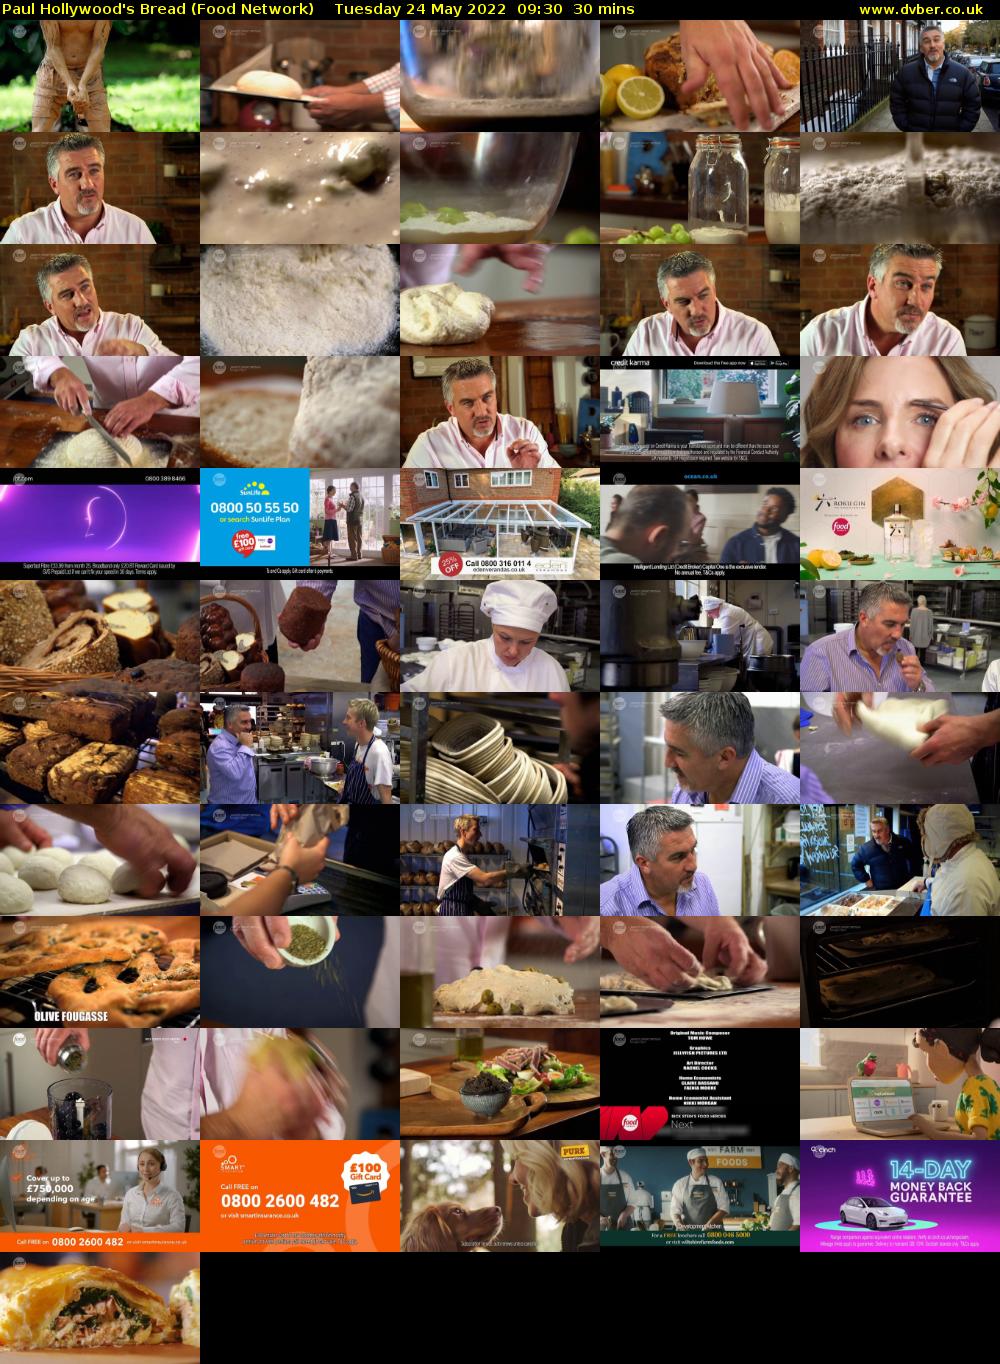 Paul Hollywood's Bread (Food Network) Tuesday 24 May 2022 09:30 - 10:00